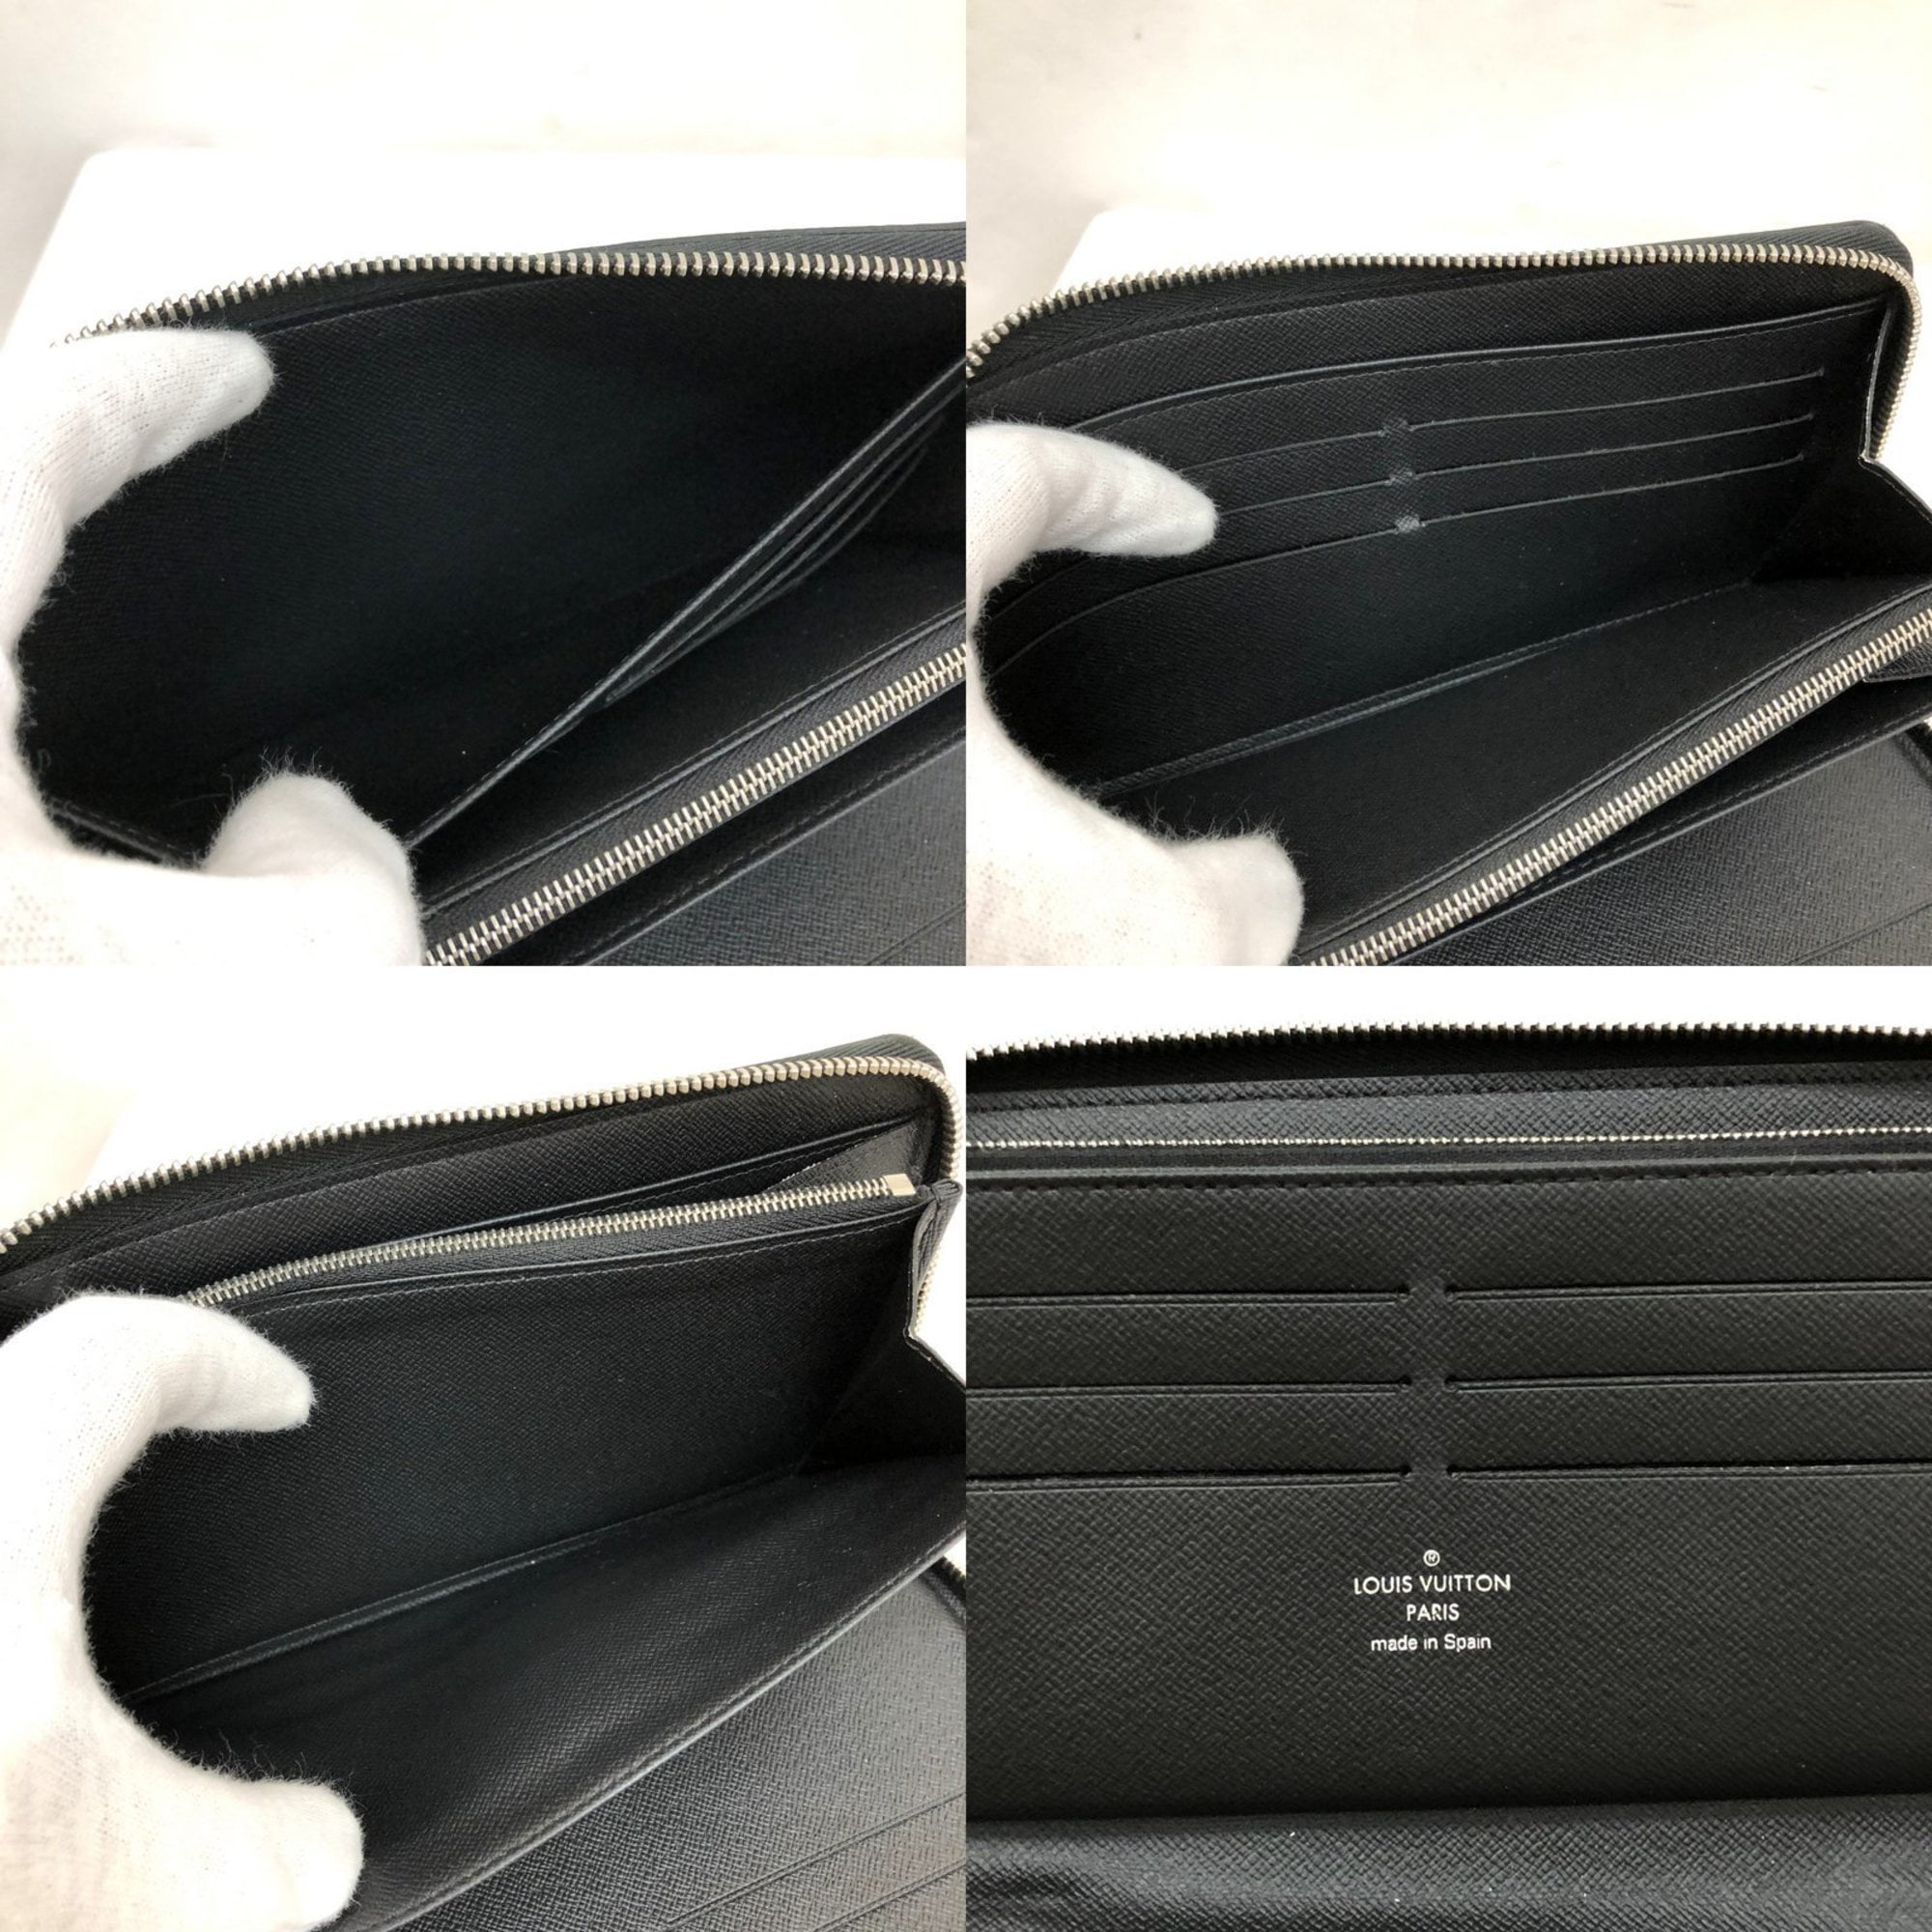 Buy [Used] Louis Vuitton Monogram Ink Upside Down Zippy Organizer NM Round  Zipper Long Wallet Long Wallet M62931 Navy PVC Wallet M62931 from Japan -  Buy authentic Plus exclusive items from Japan